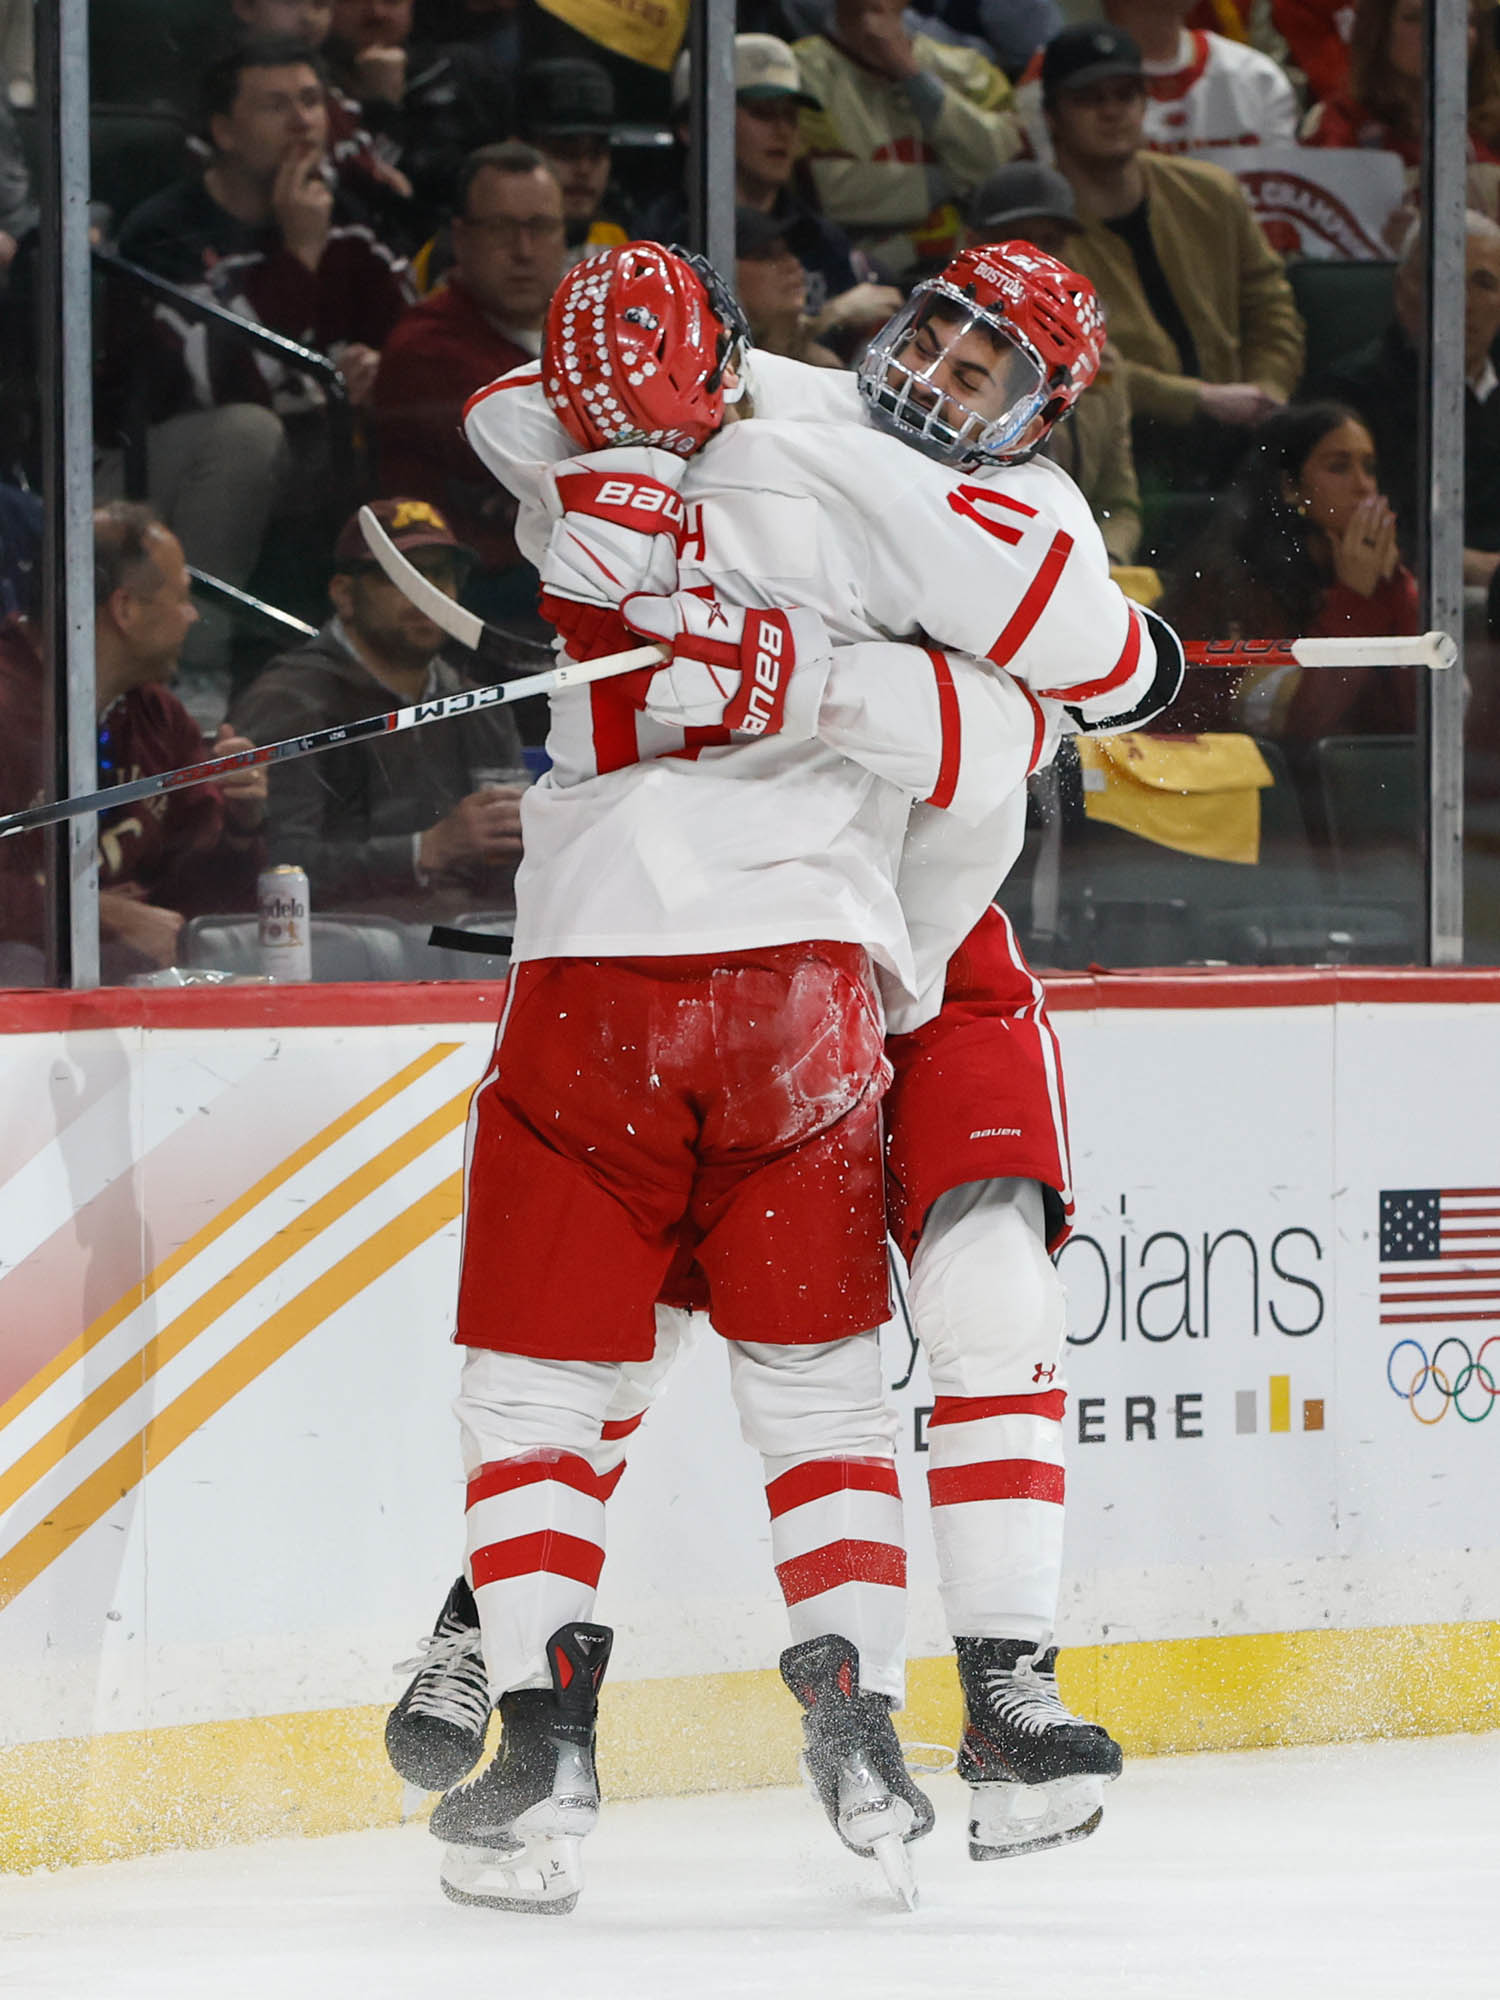 Photo: Two hockey players embrace in a tussle on the ice.